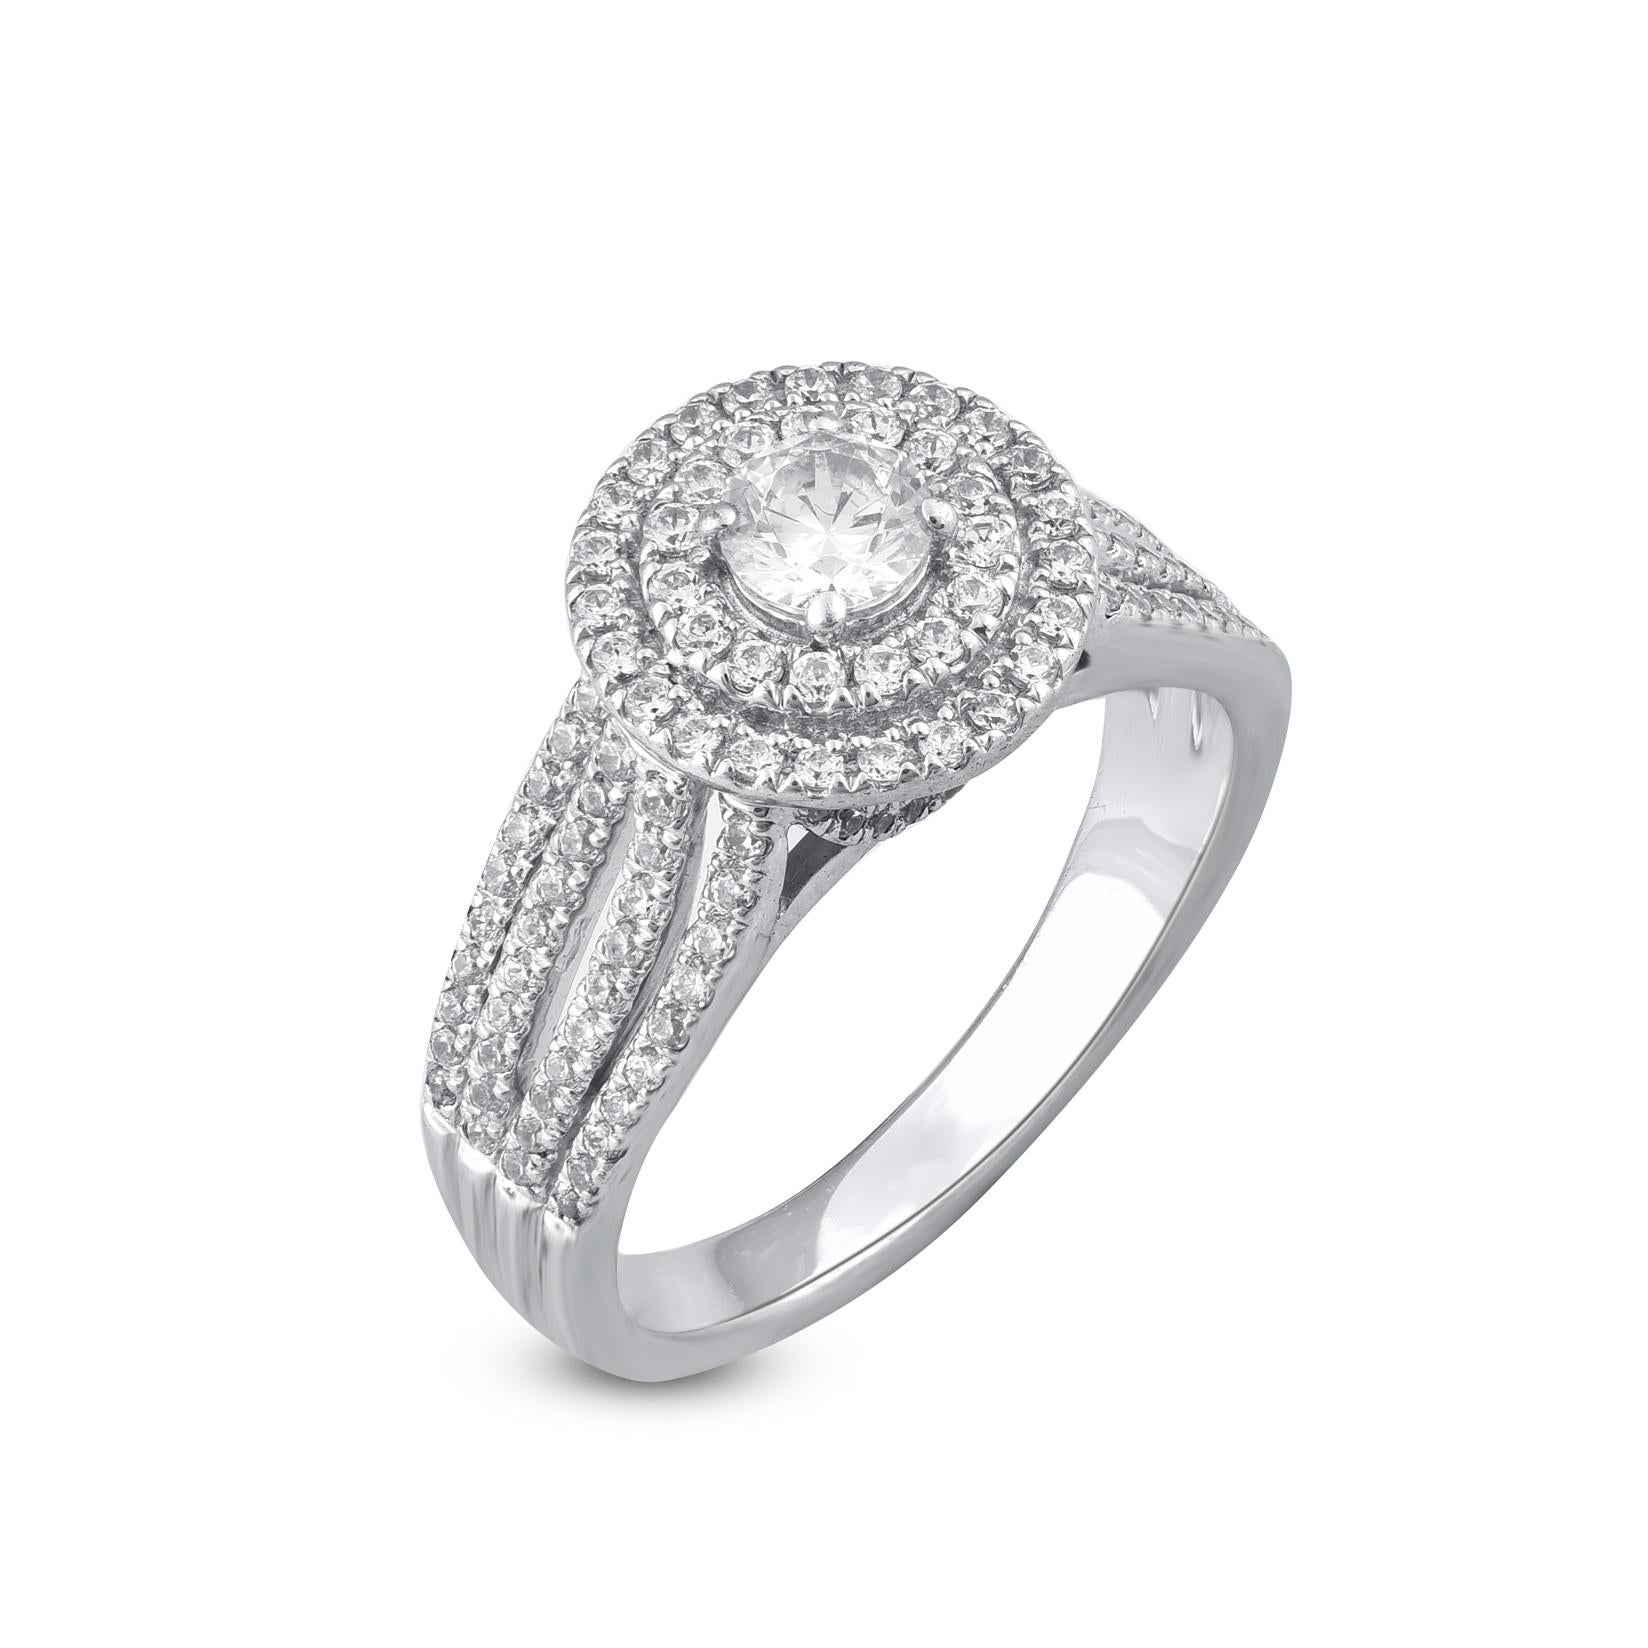 Beautiful Round Natural Diamond Double Frame Engagement Ring. This ring is beautifully designed in 18 karat white gold with 136 round diamond 0.33ct Centre stone and 0.67ct diamond frame and shank lined diamonds set in prong and pave setting. The